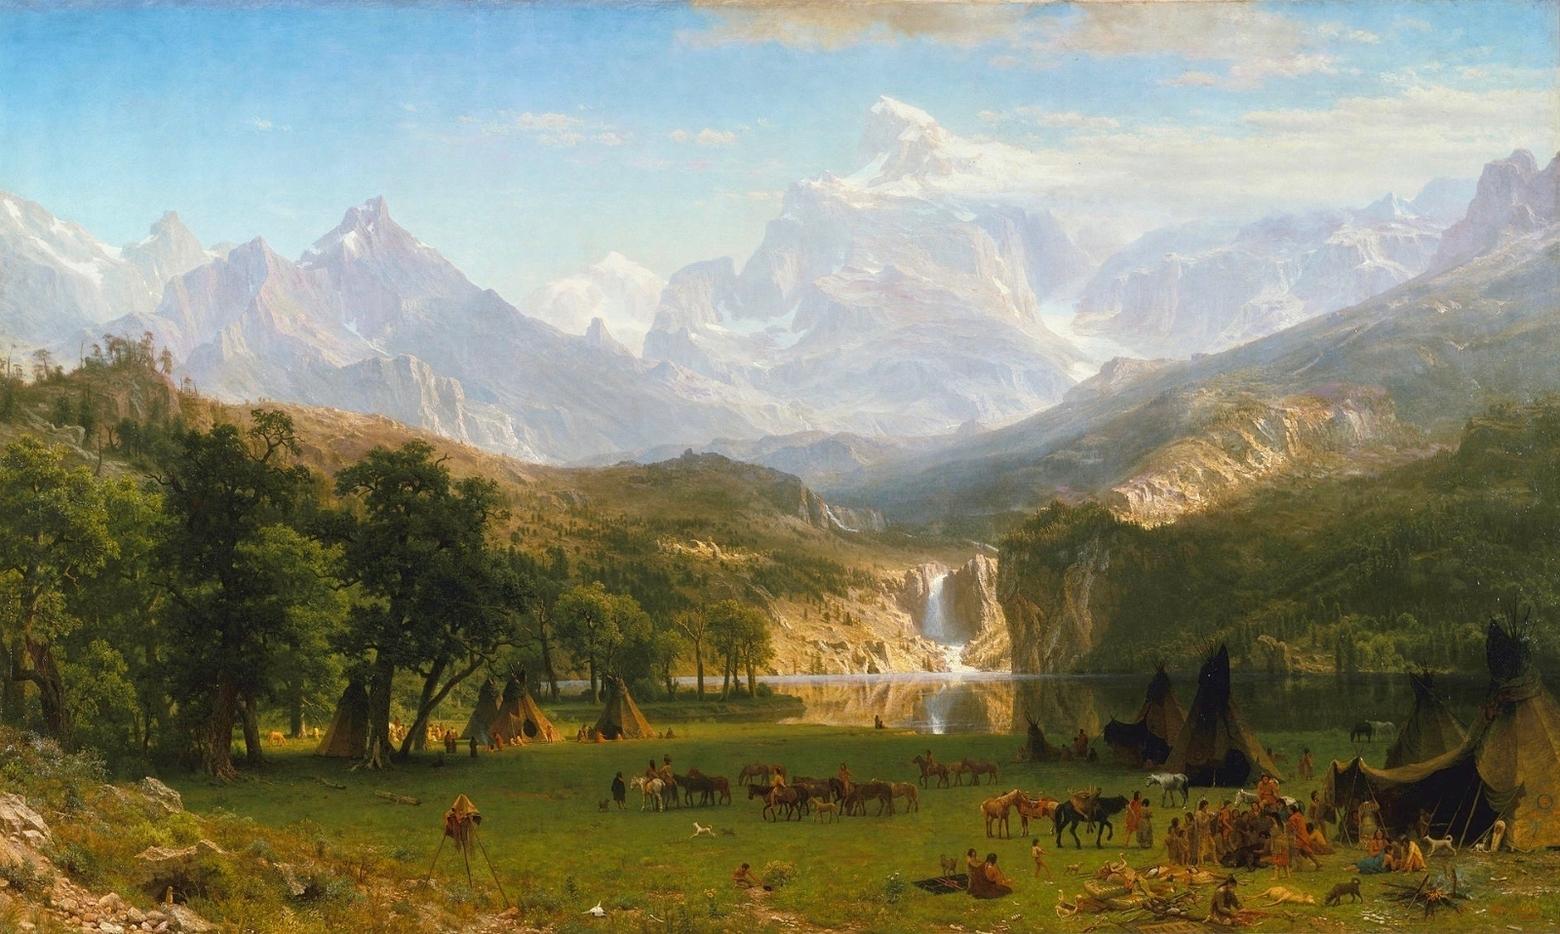 "The Rocky Mountains, Lander's Peak" (1863) in Metropolitan Museum of Art, New York City.  This painting, completed while the Civil War was still raging and 27 years before Wyoming gained statehood, conveys the scene of a Shoshone encampment alongside the Wind River Range.